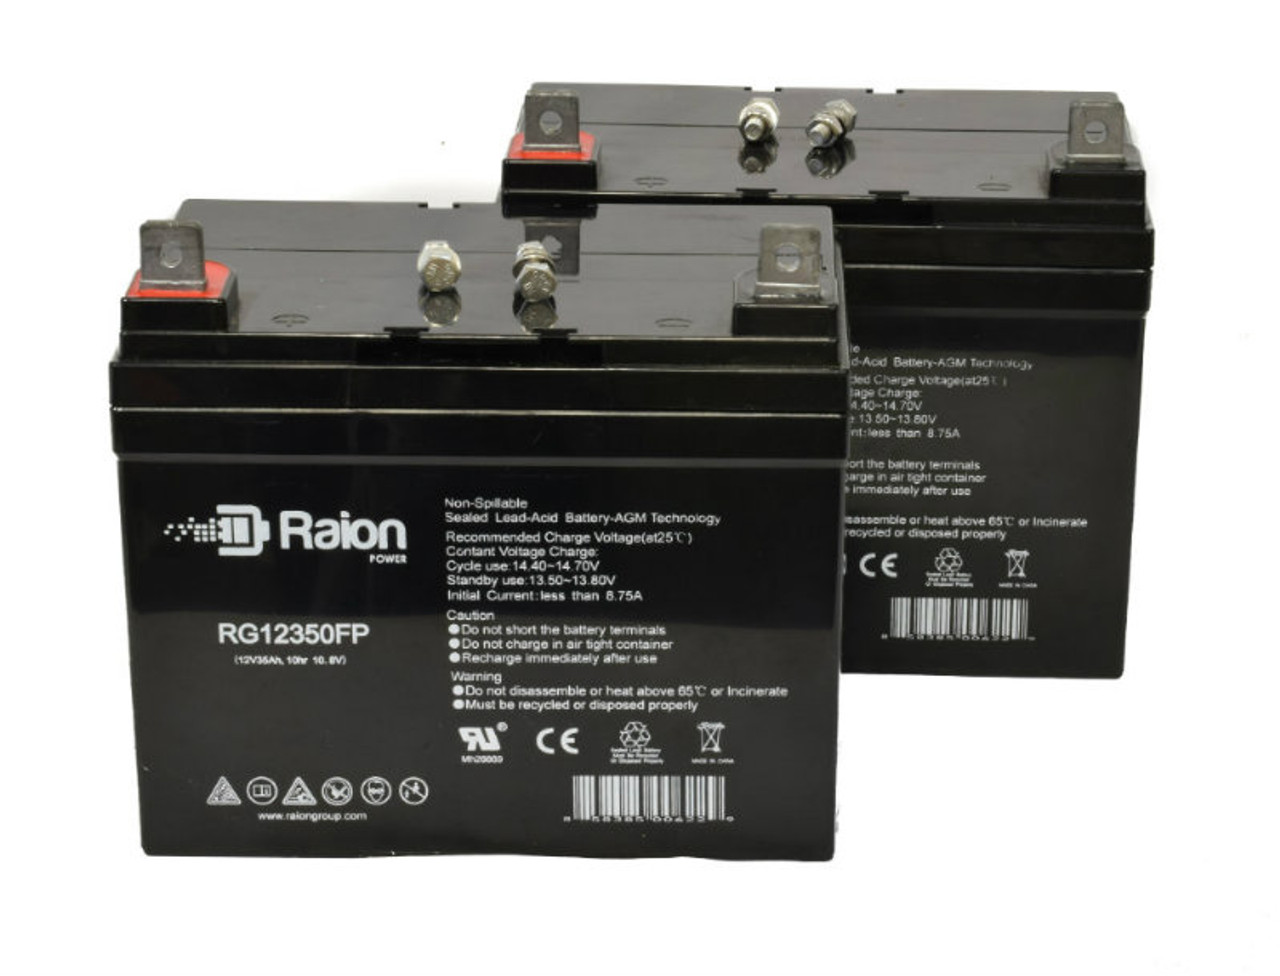 Raion Power Replacement 12V 35Ah Lawn Mower Battery for John Deere LX172 - 2 Pack